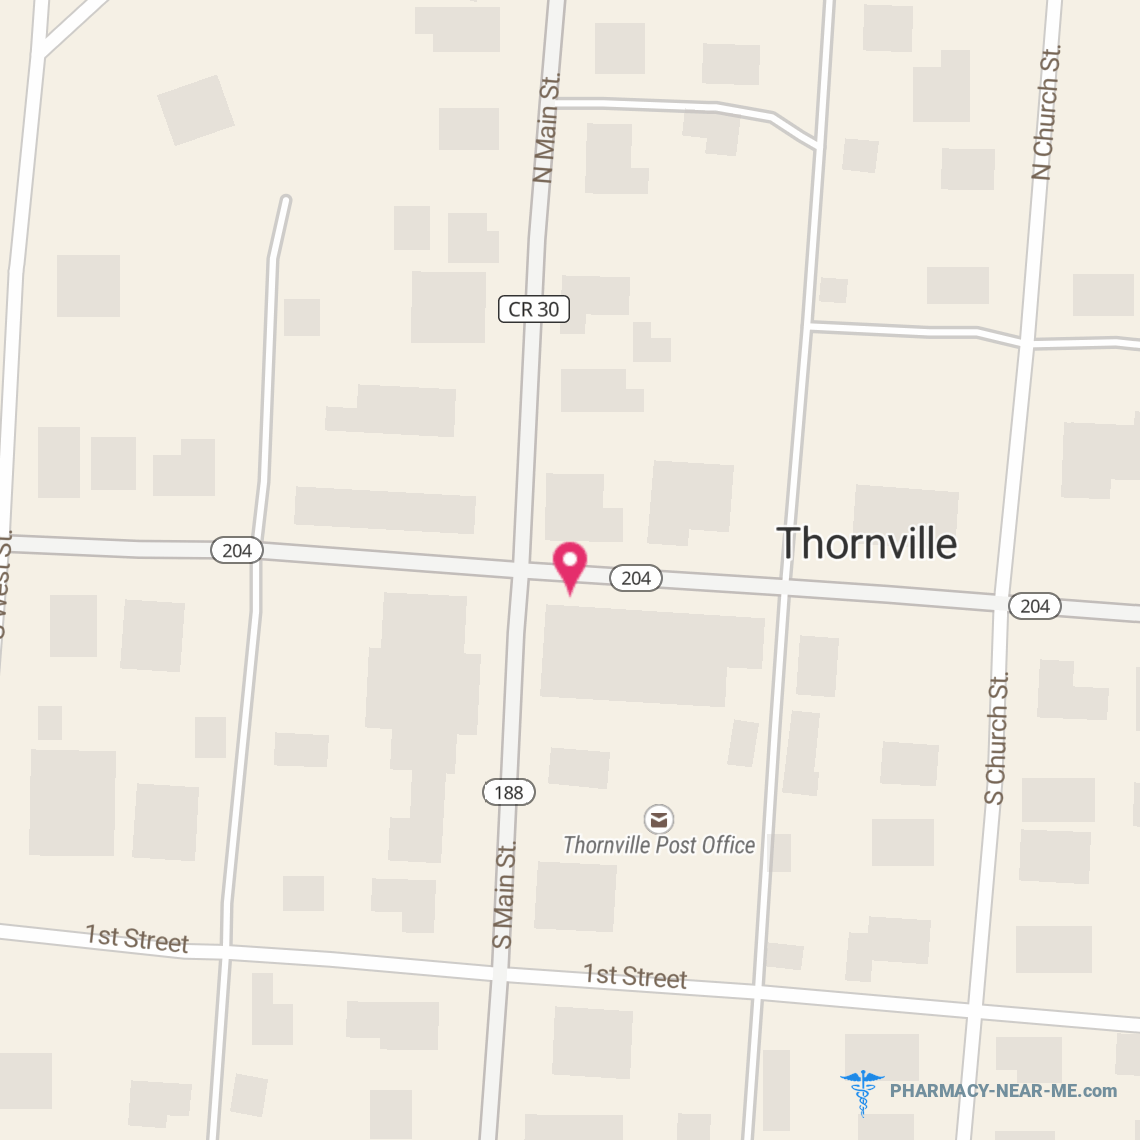 THORNVILLE PHARMACY - Pharmacy Hours, Phone, Reviews & Information: 2 N Main St, Thornville, Ohio 43076, United States